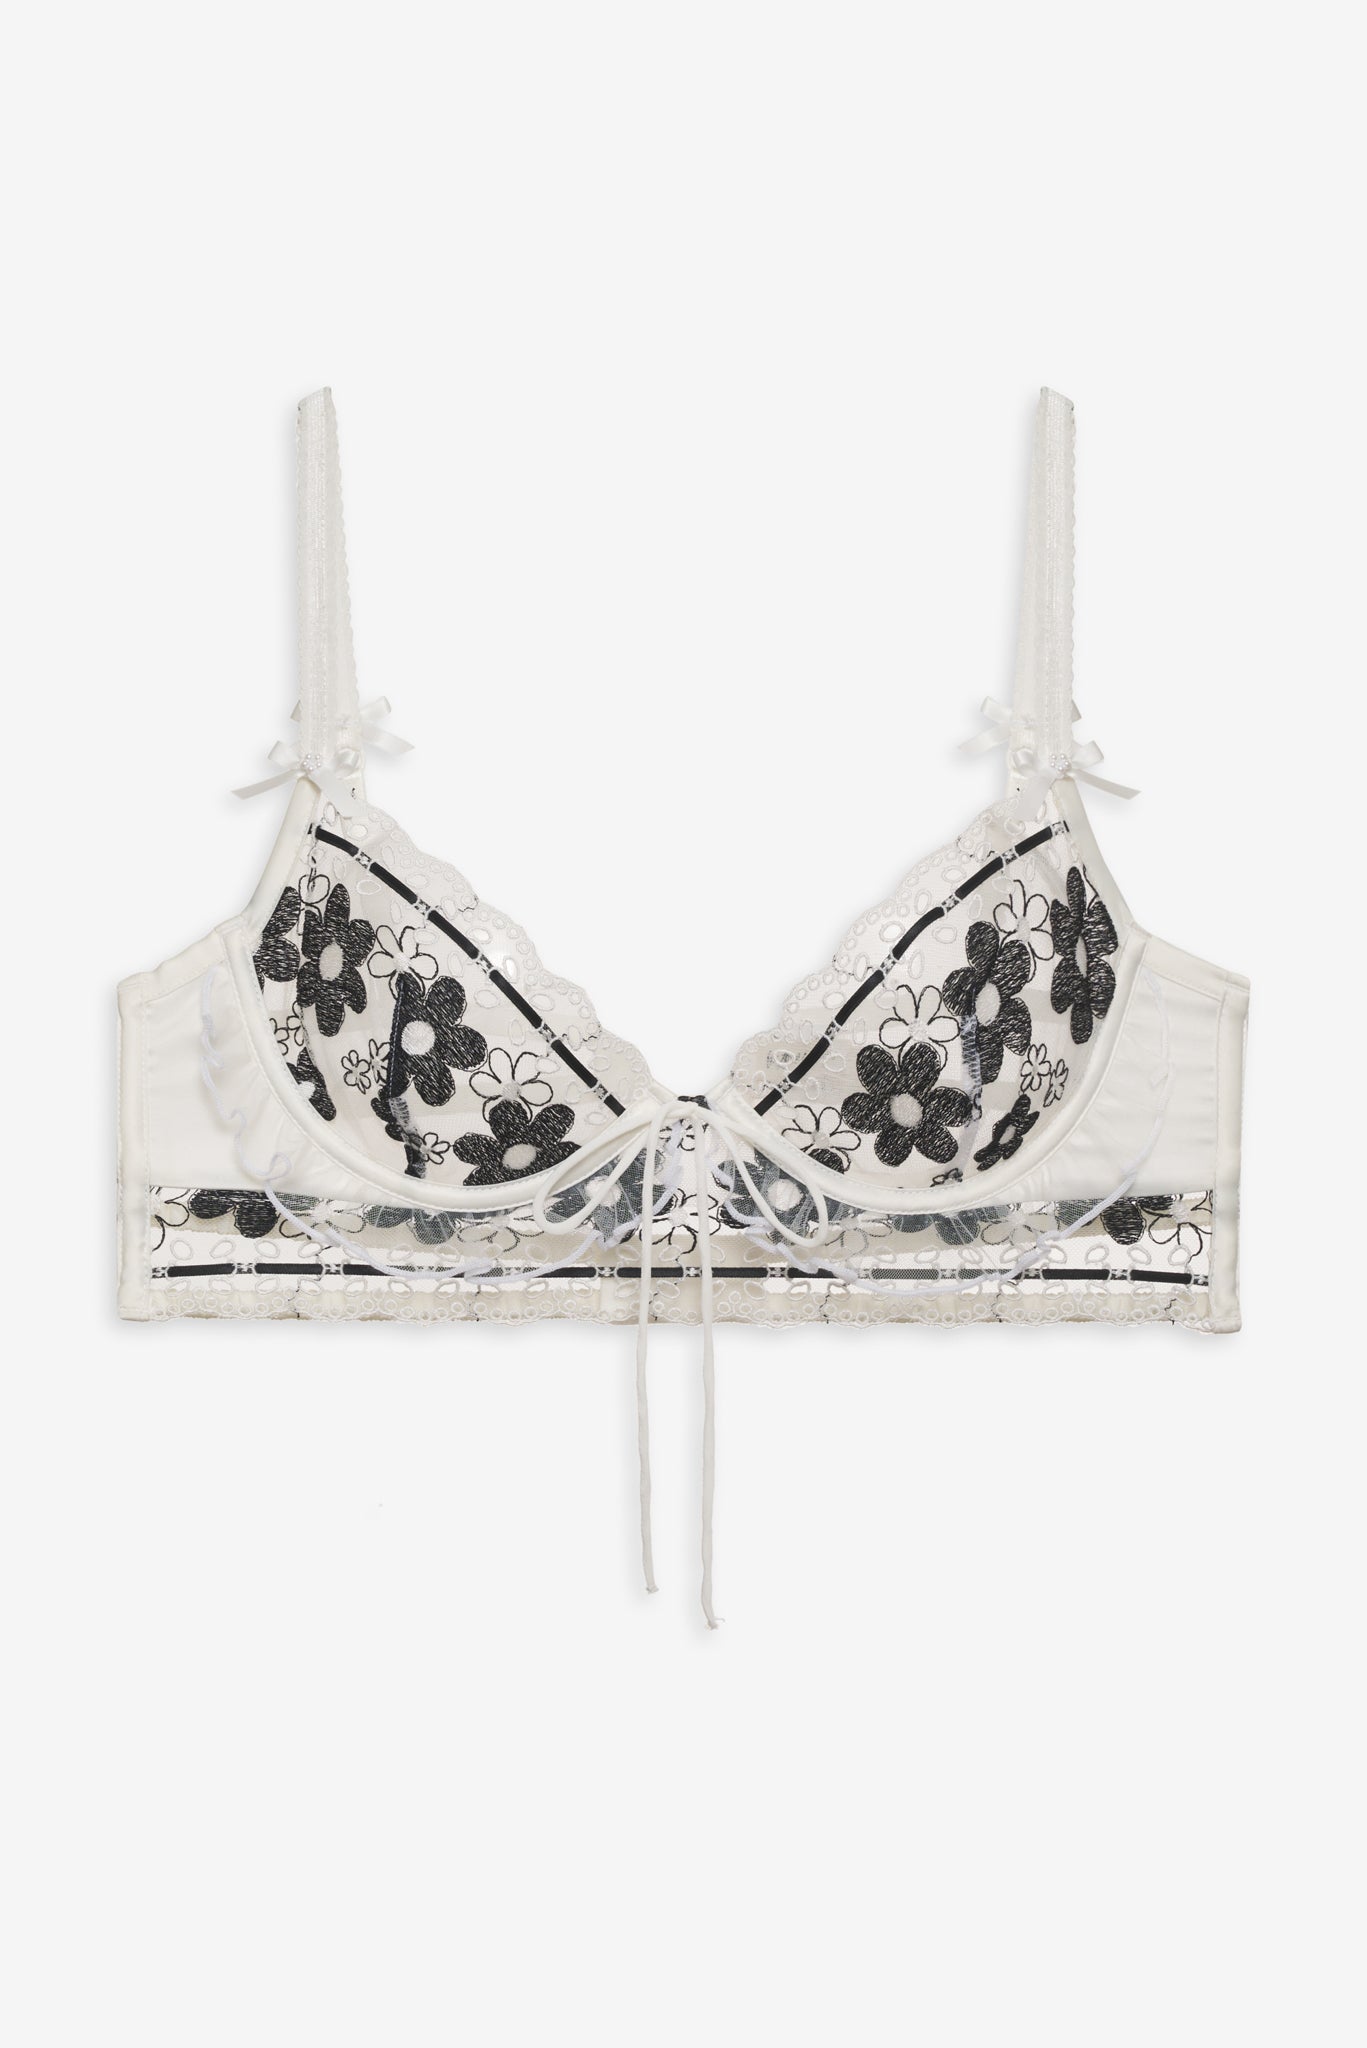 Lifeandlensofbeauty: Aimer takes luxury lingerie to a new level